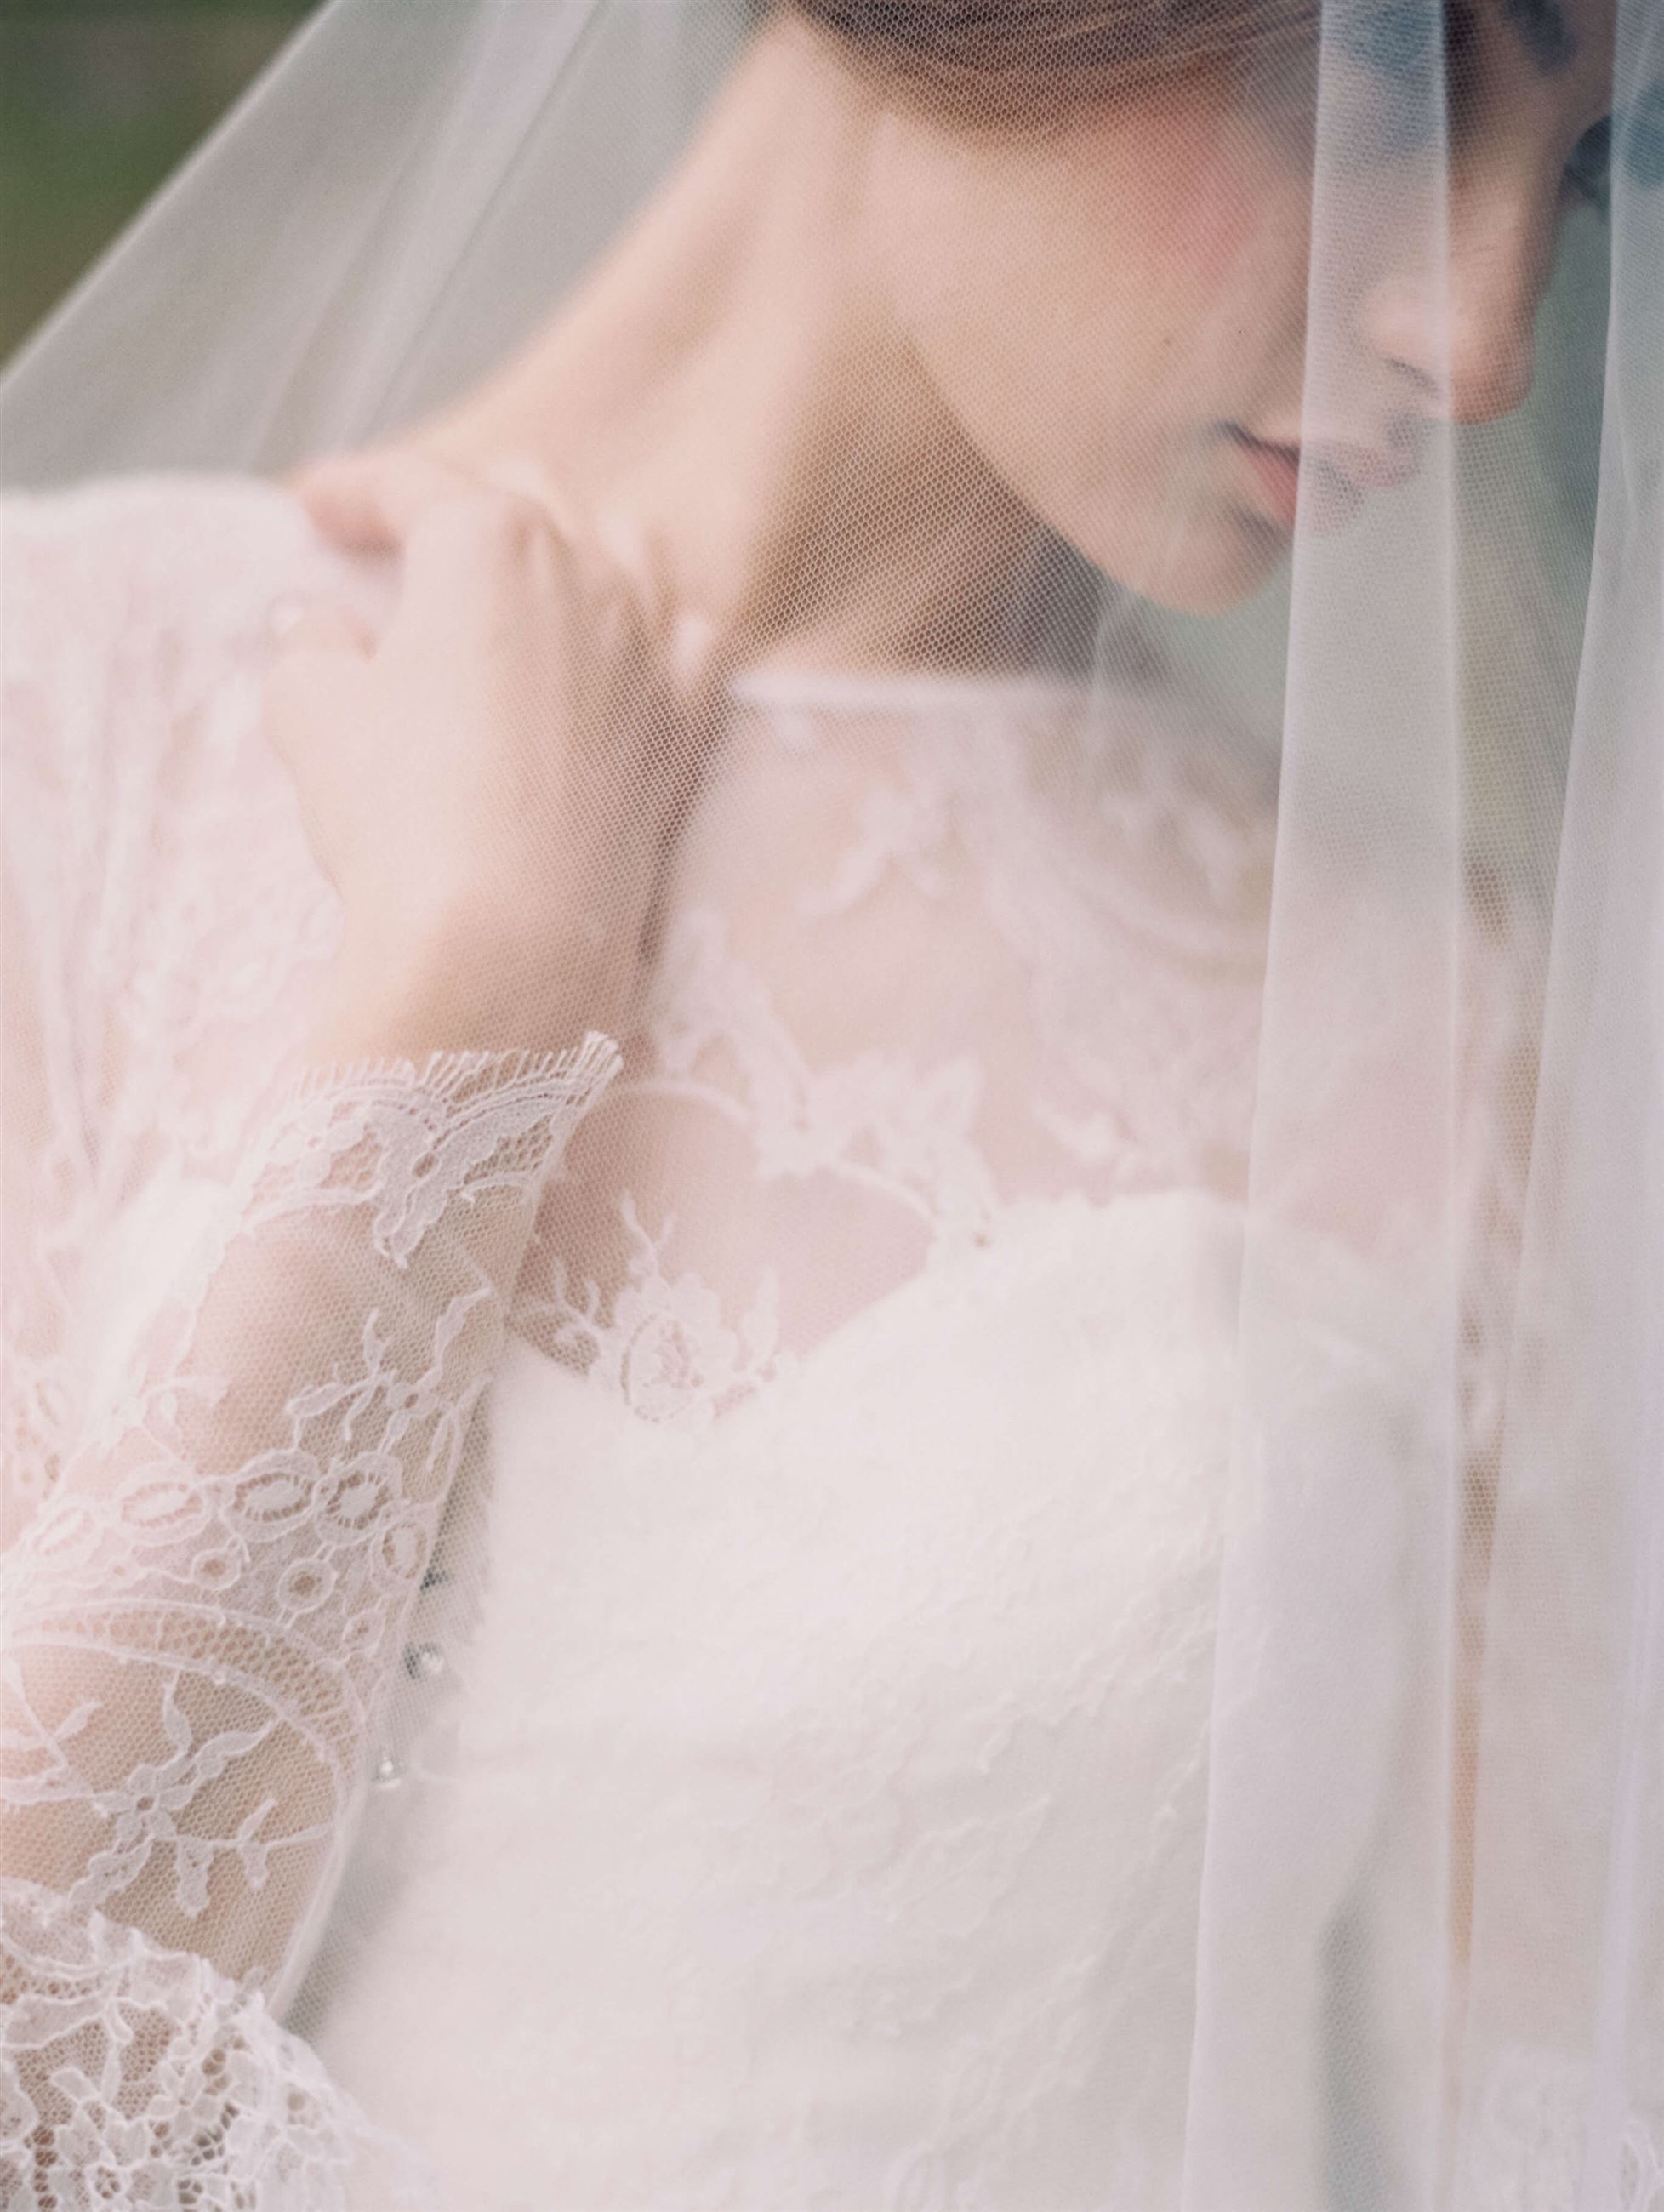 Model wearing bridal gown under the veil